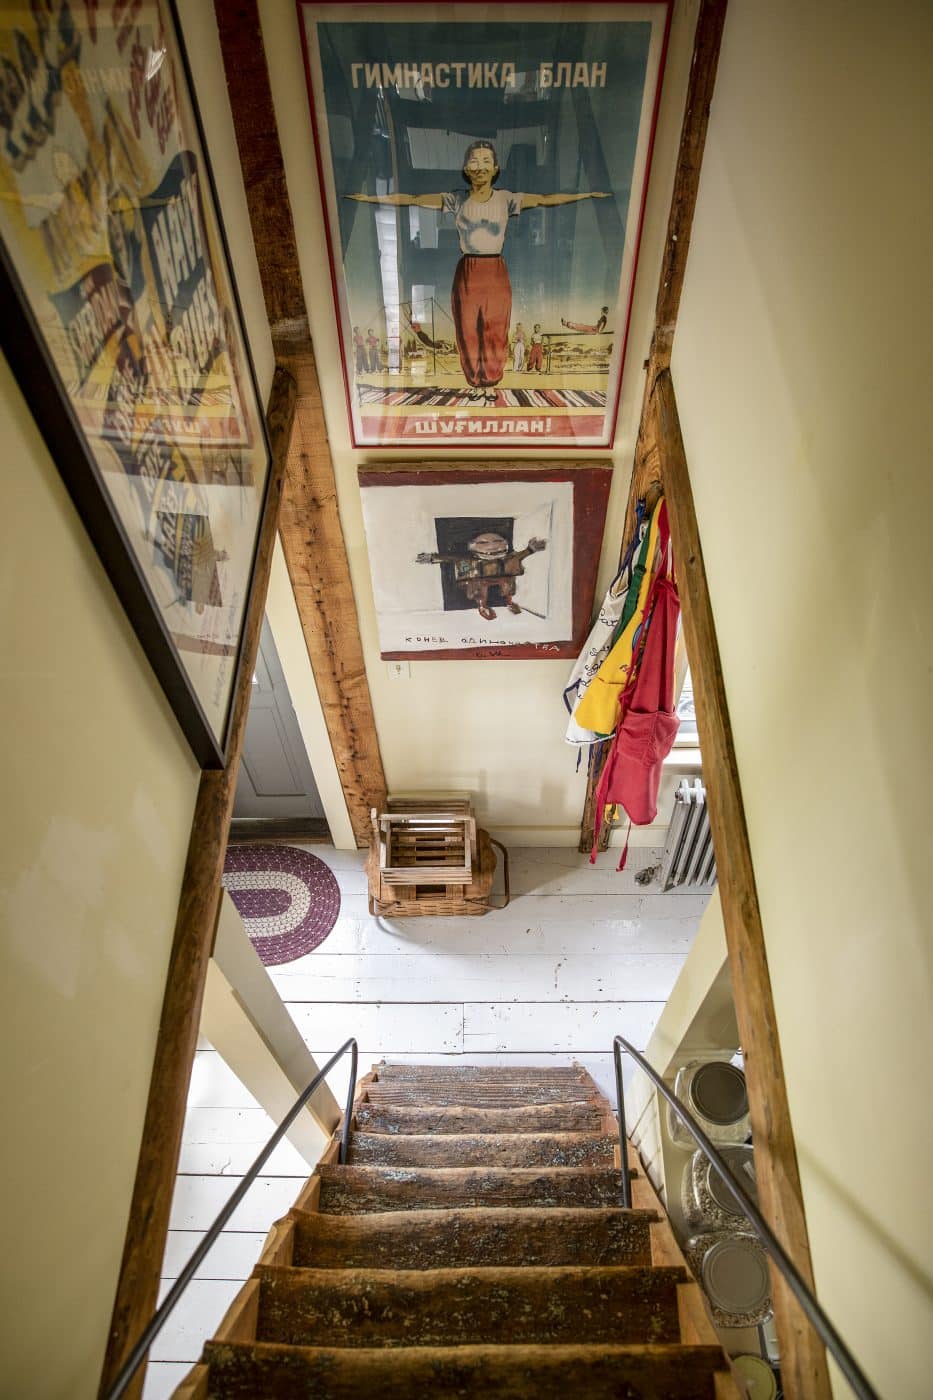 A stairway in a Maine home decorated with posters on the wall